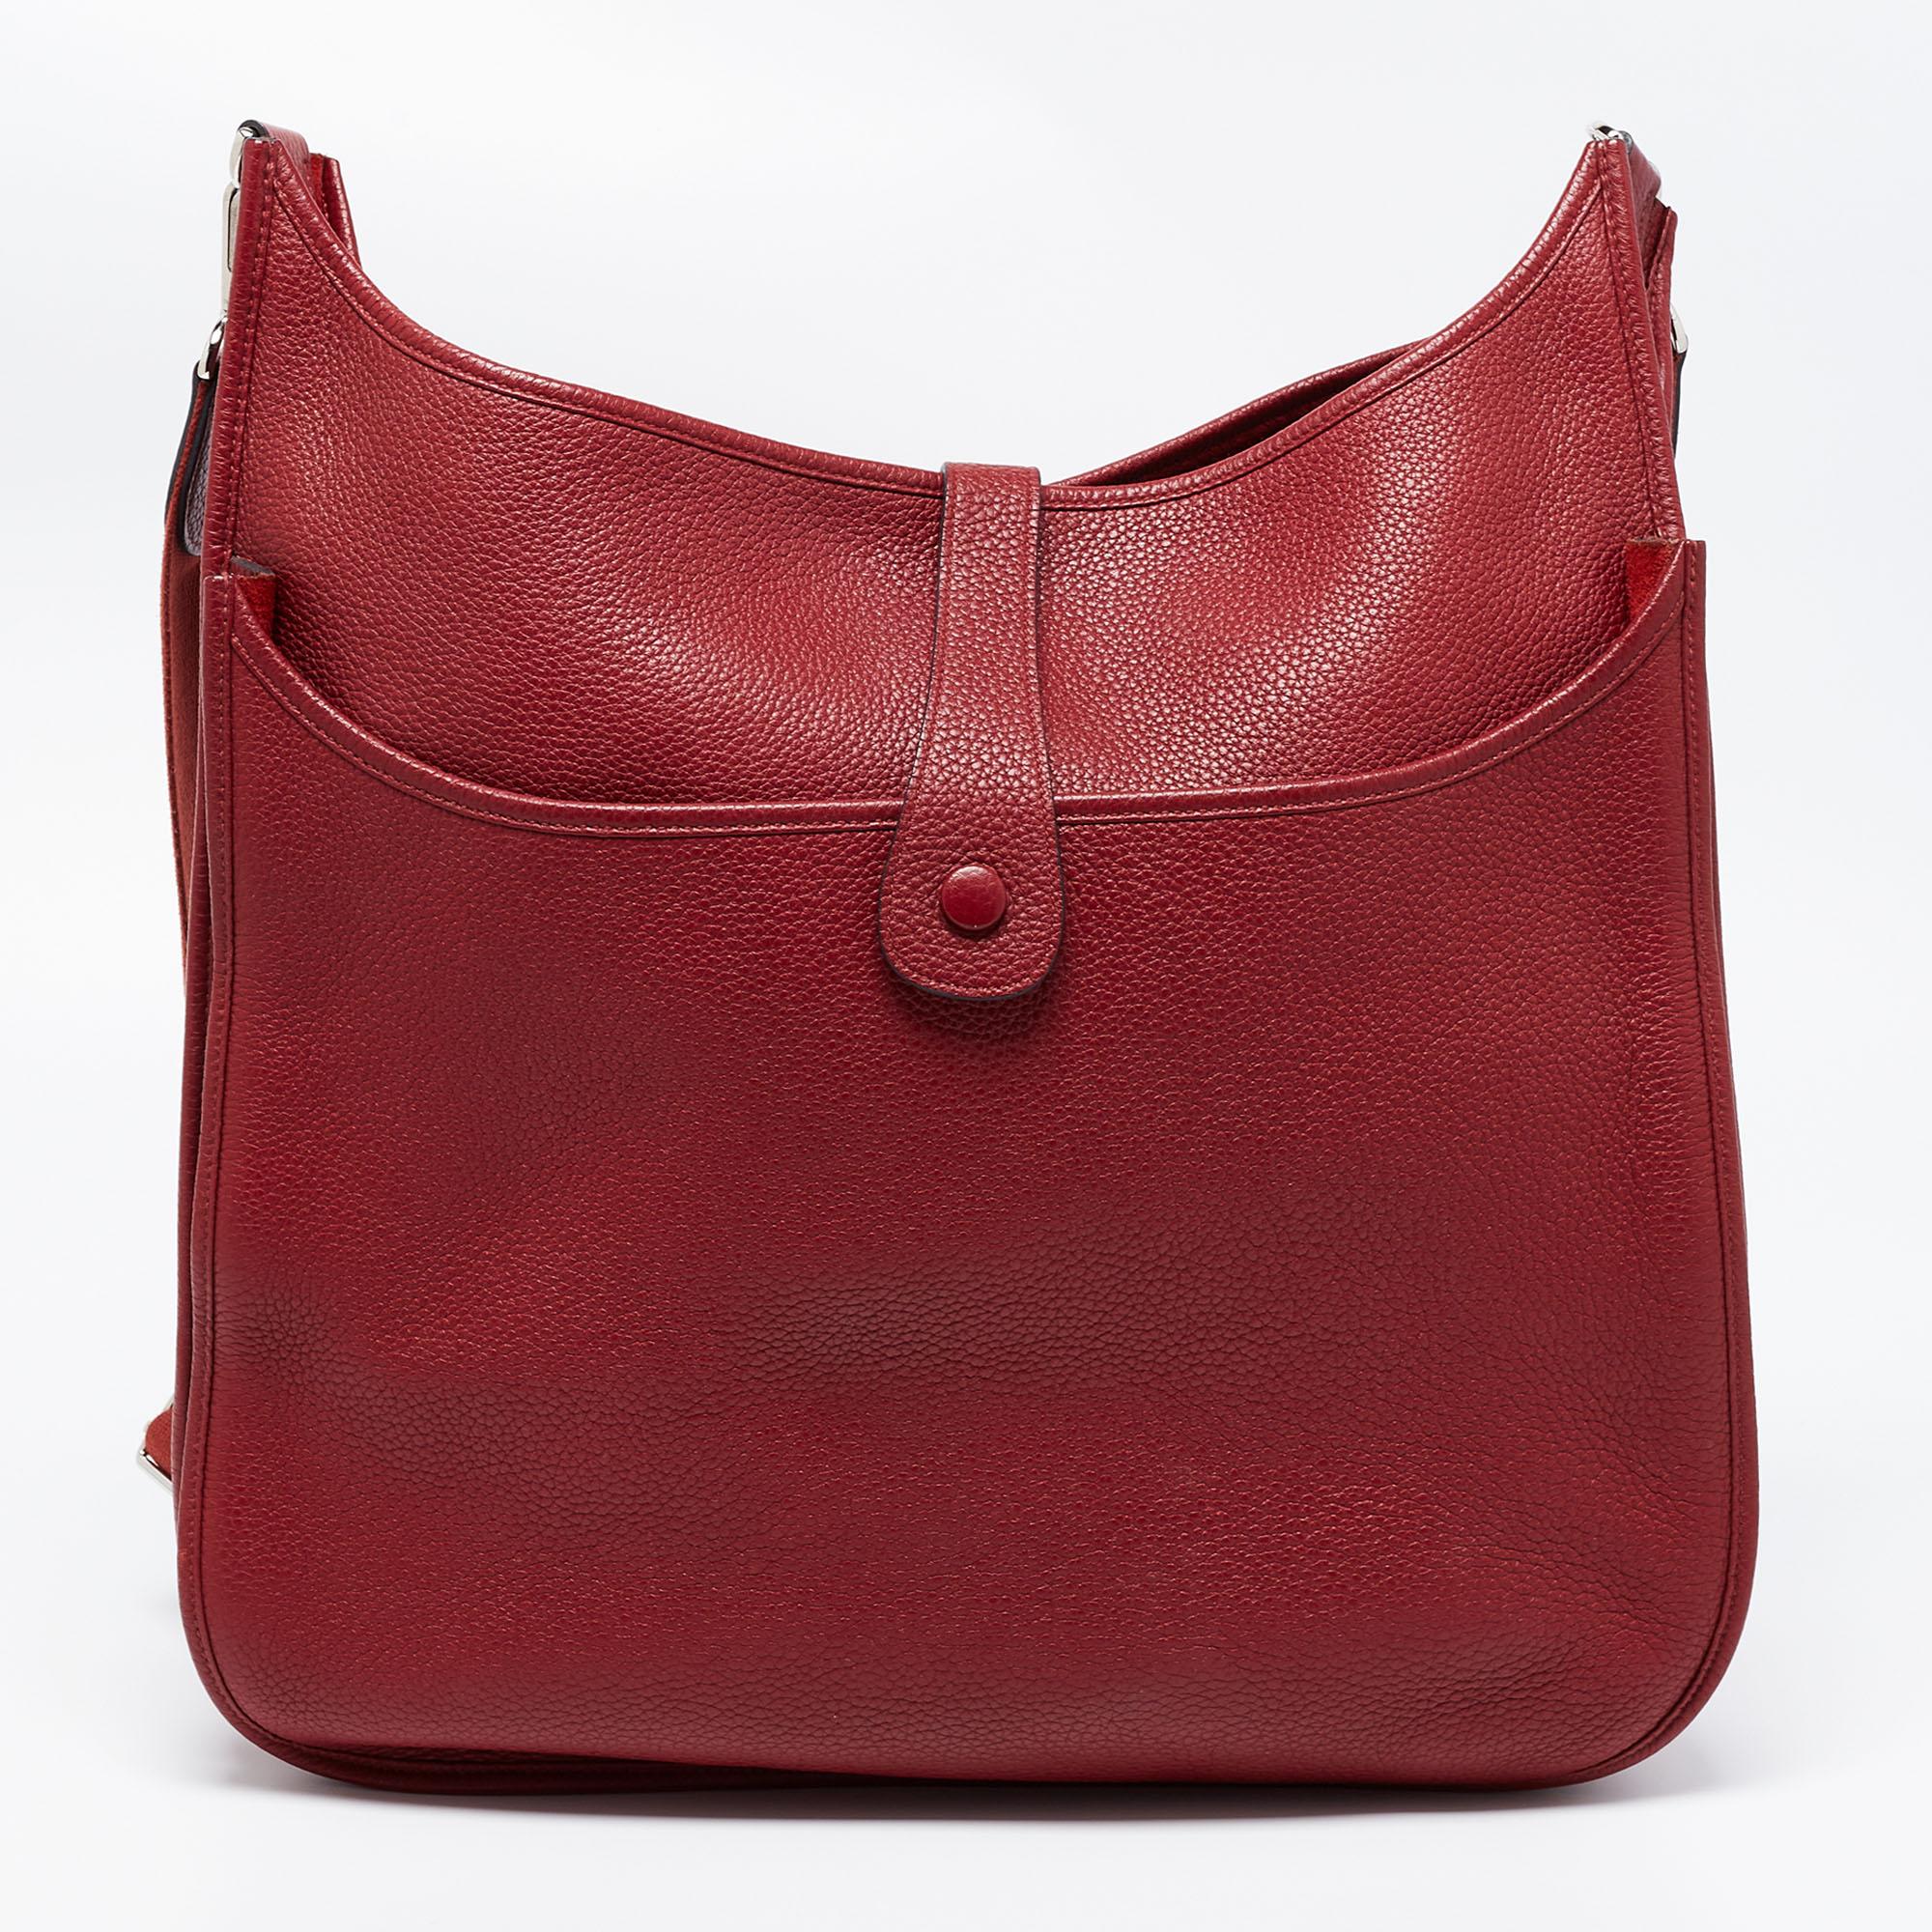 This Evelyne III TGM bag from the House of Hermes exudes the right amount of class and elegance. Crafted from Rouge Garance Togo leather, this bag is adorned with a shoulder strap and silver-tone hardware. It accommodates an unlined interior. Make